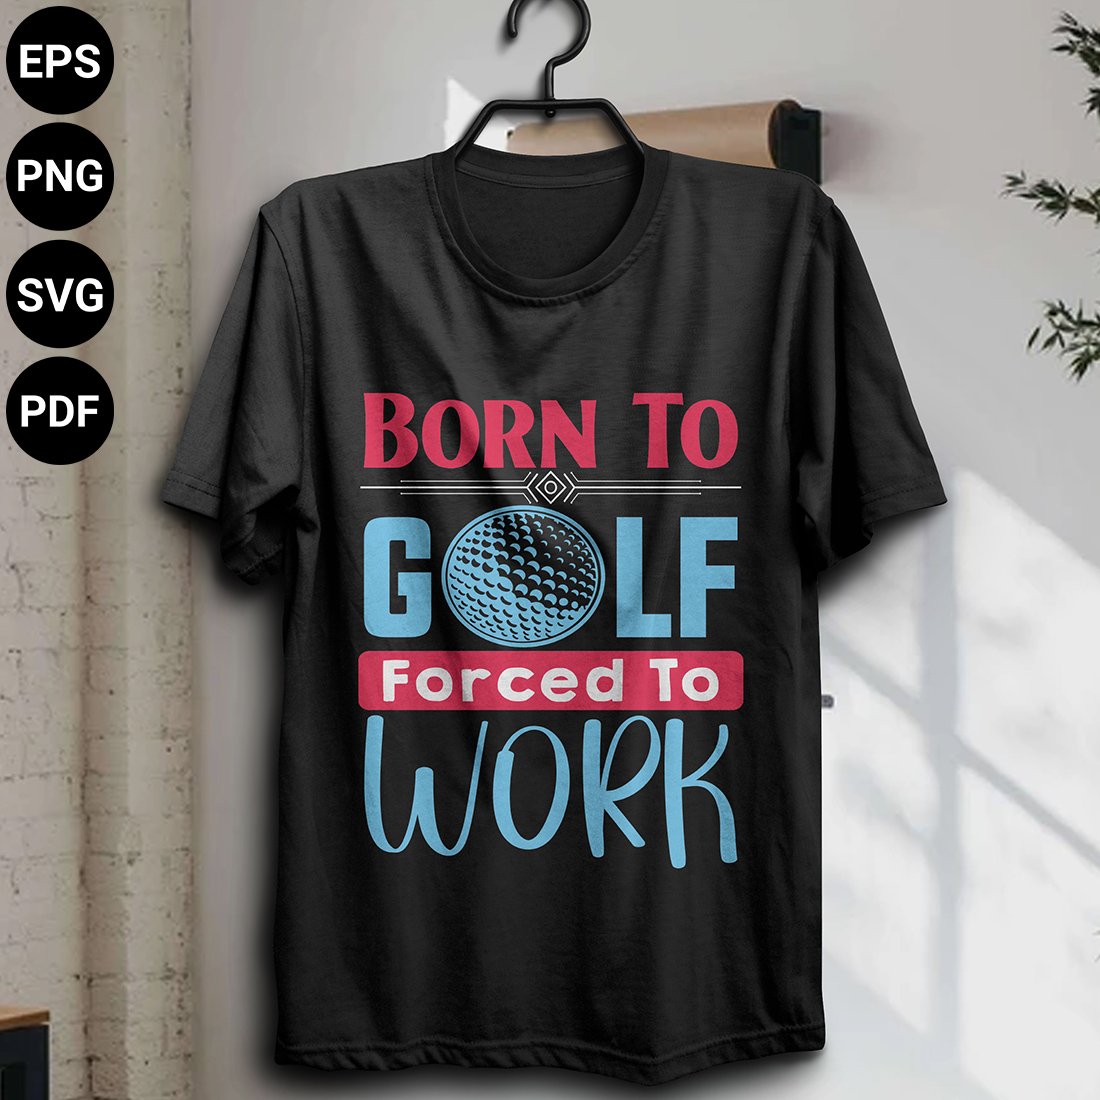 Born To Golf Forced To Work Typography T Shirt Design cover image.